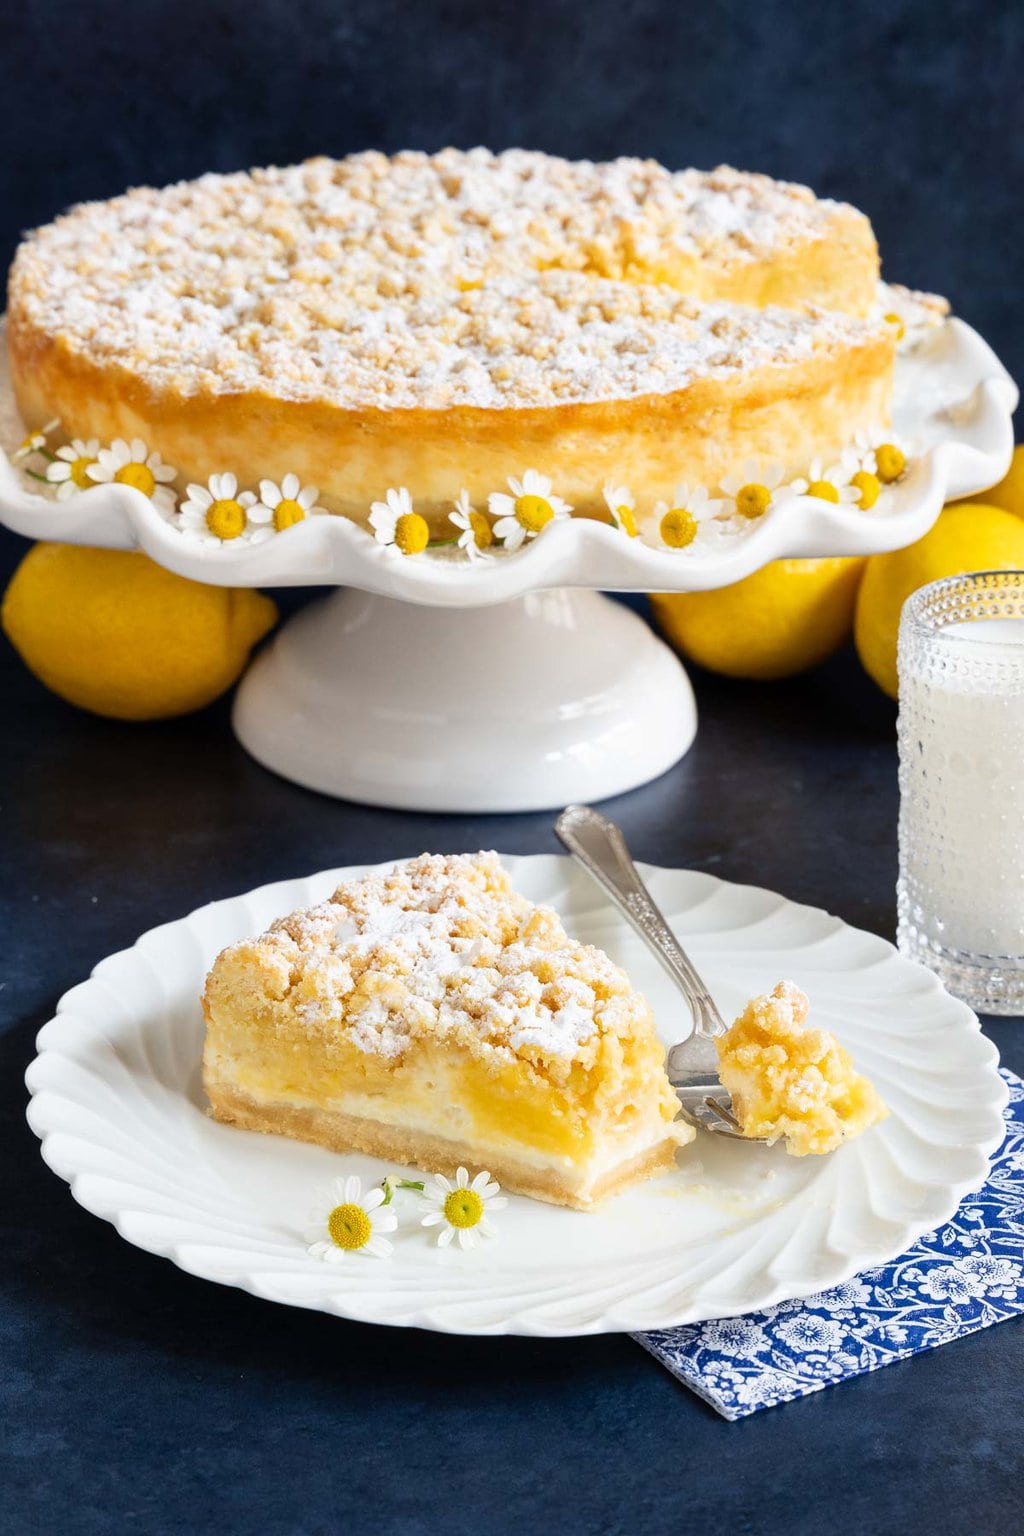 Vertical photo of a Italian Lemon Curd Ricotta Tart on a white pedestal serving plate with a slice of the tart on an individual serving plate.